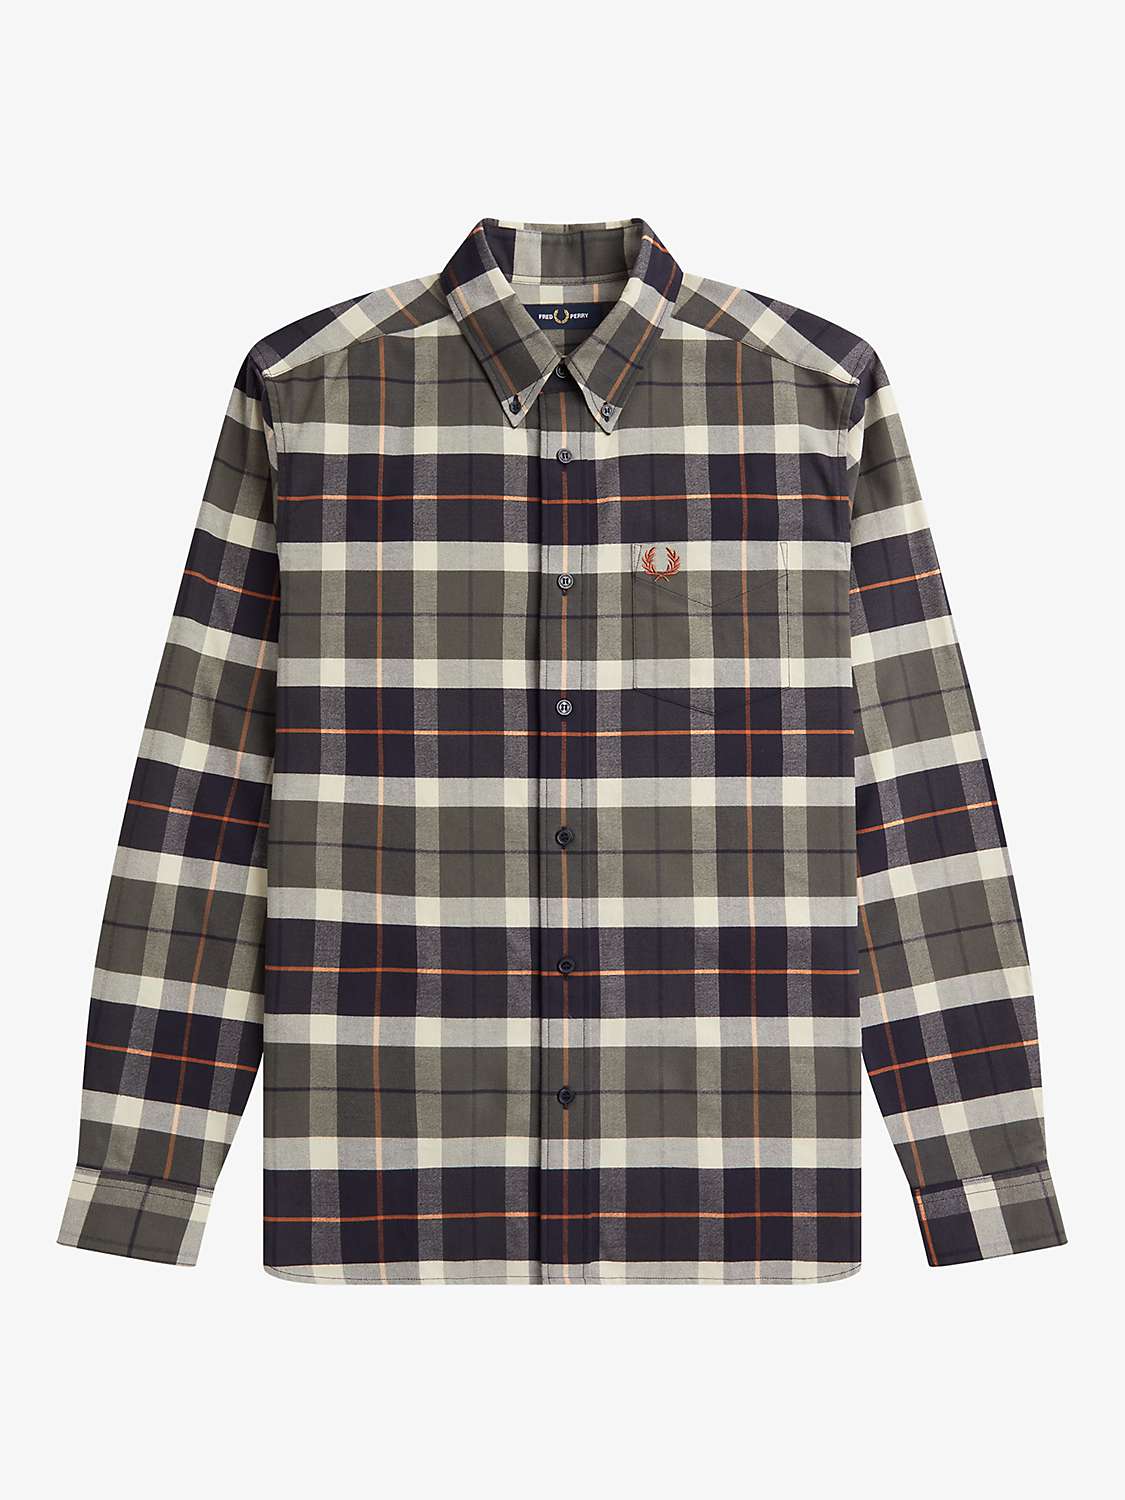 Buy Fred Perry Brush Tartan Check Oxford Shirt, Green/Multi Online at johnlewis.com